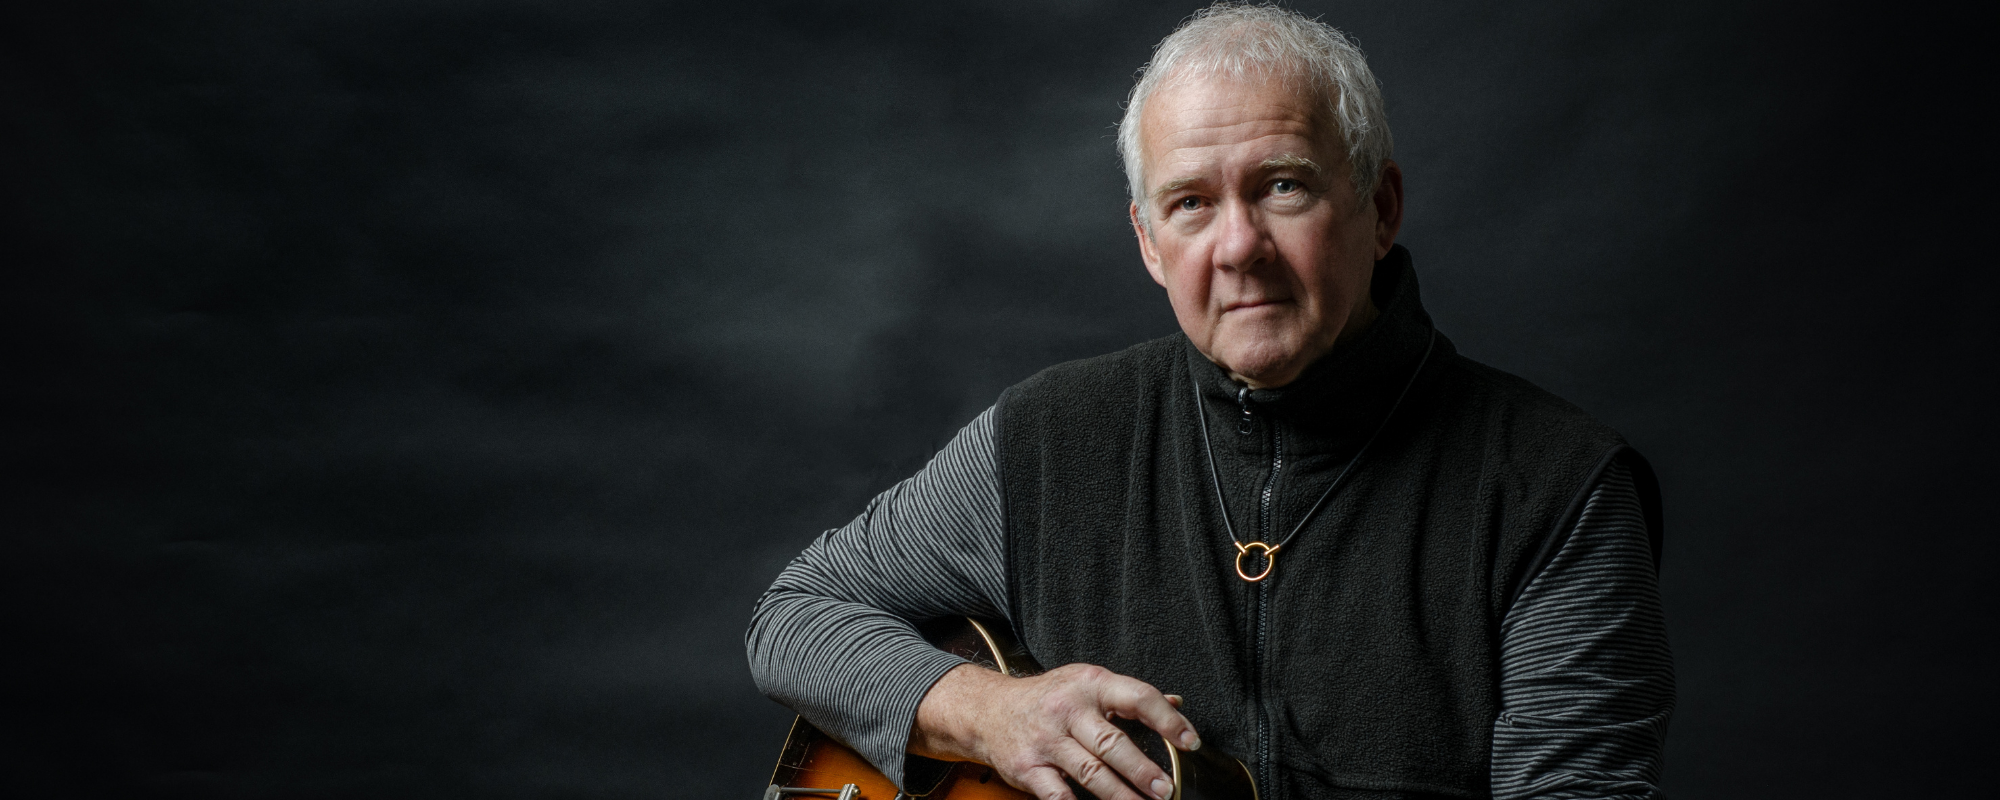 Prolific Songwriter Murray McLauchlan Likens New Songs From His 20th LP ‘Hourglass’ to “Children’s Songs for Adults”